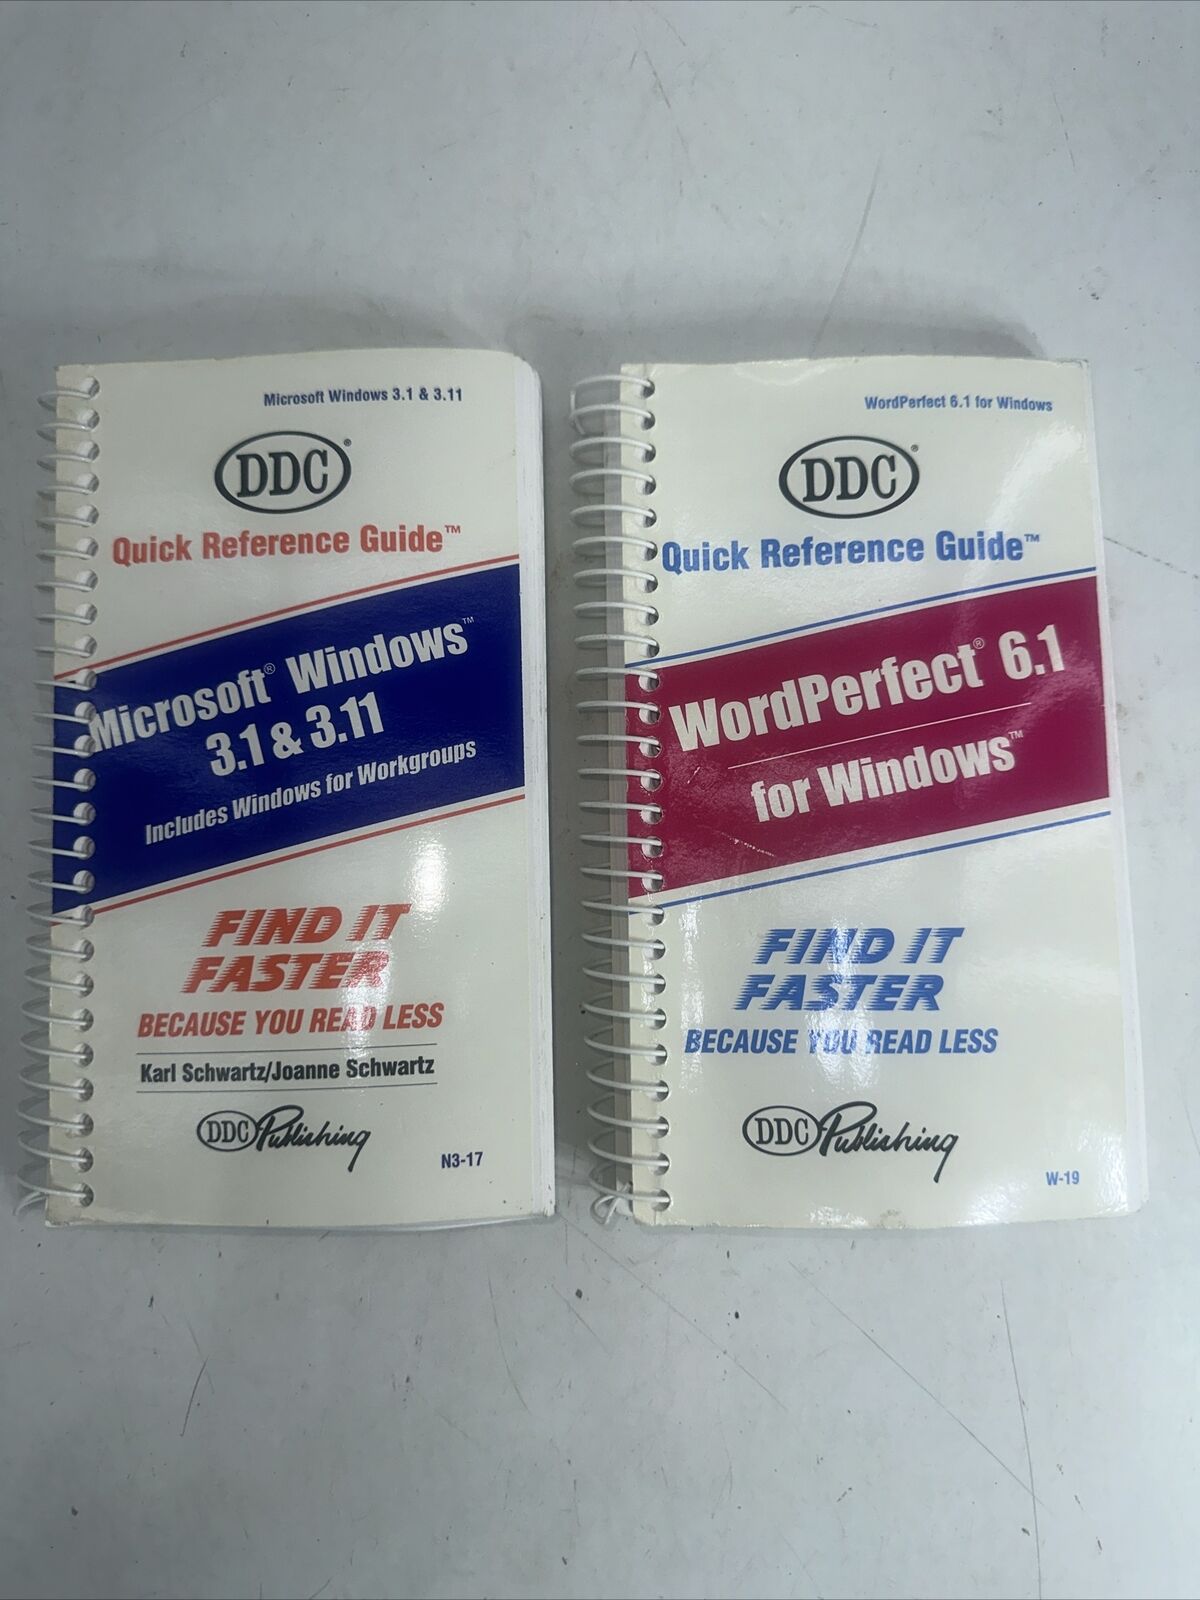 VTG Microsoft Windows Guide 3.1 Quick Reference IBM PC Book  WordPerfect 6.1 Lot